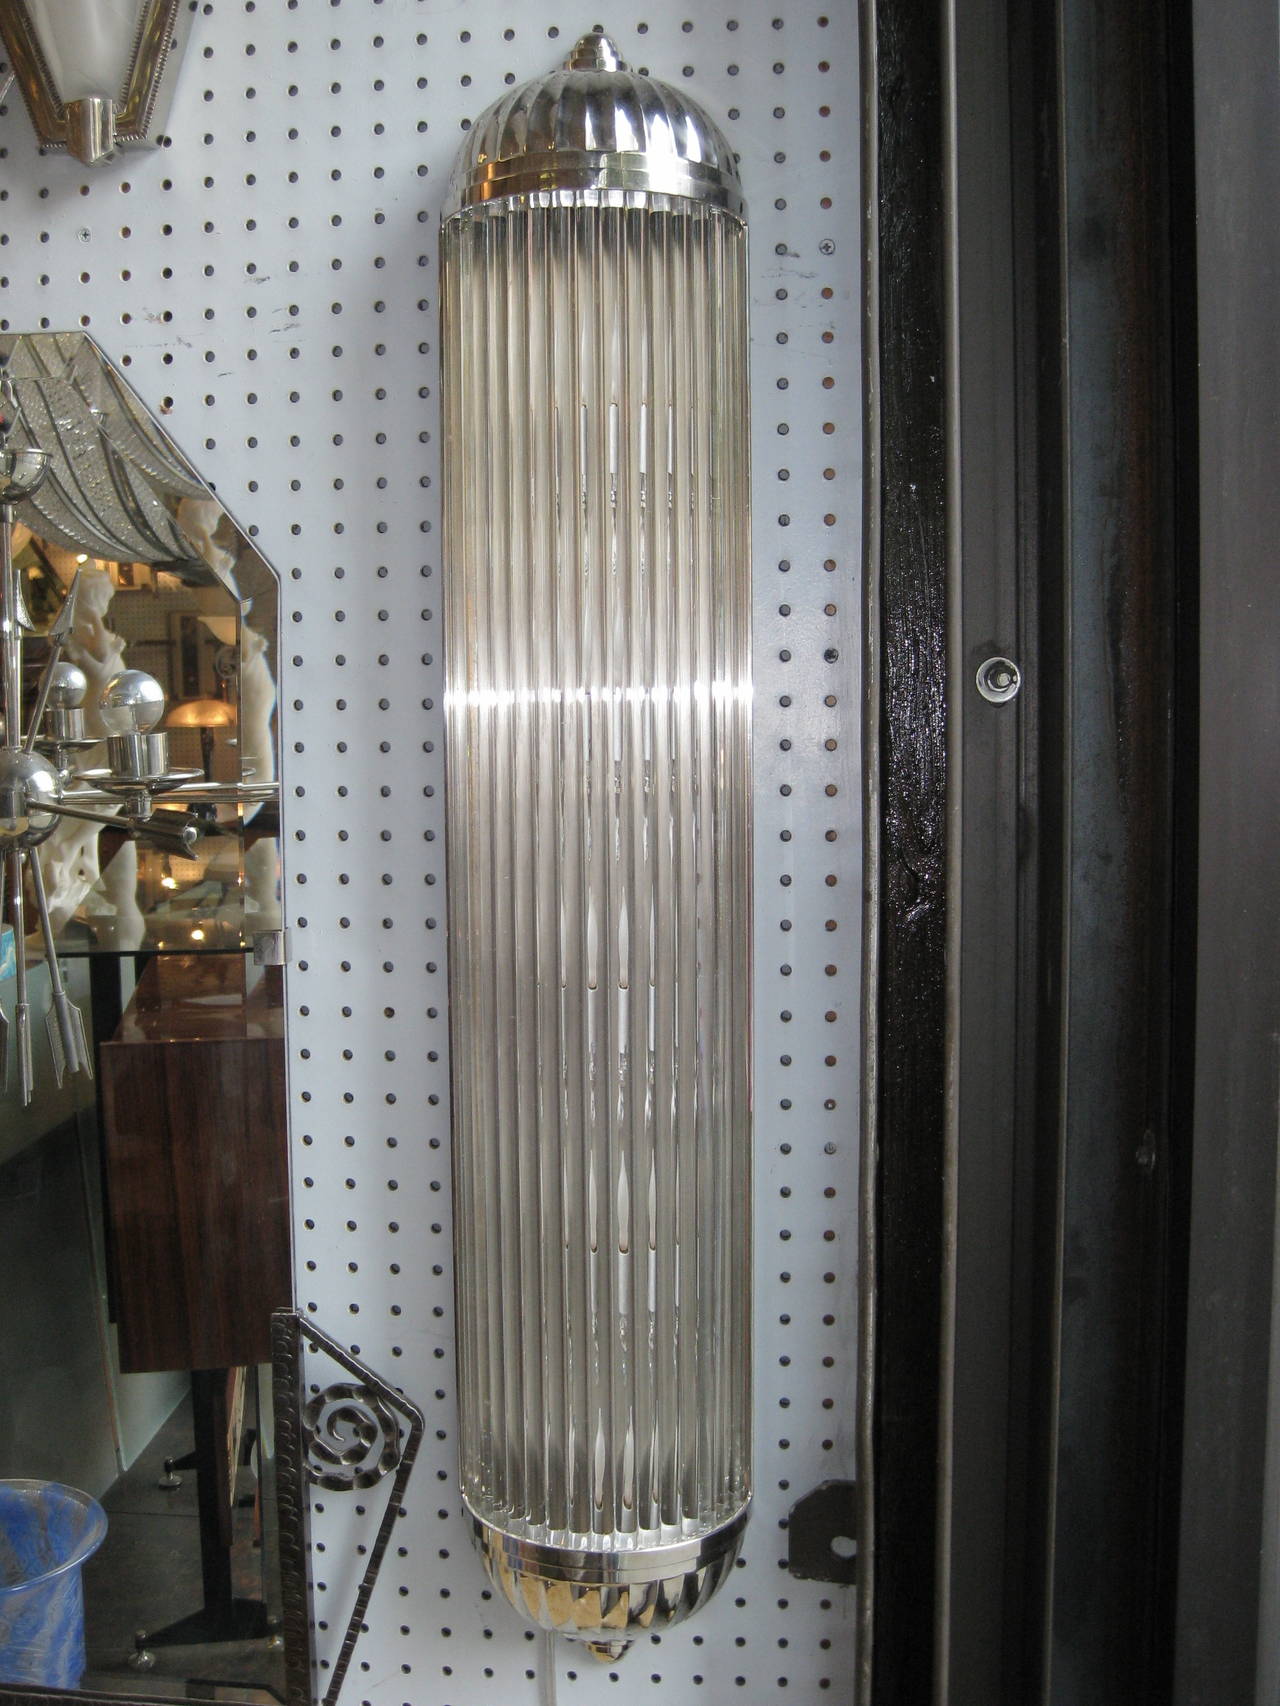 French tubular sconces featuring long solid glass rods that form a semi cylindrically shaped column, mounted in heavily cast polished nickeled bronze frames with ends terminating in fluted bullet tips.
Sconces can be adapted to hang either